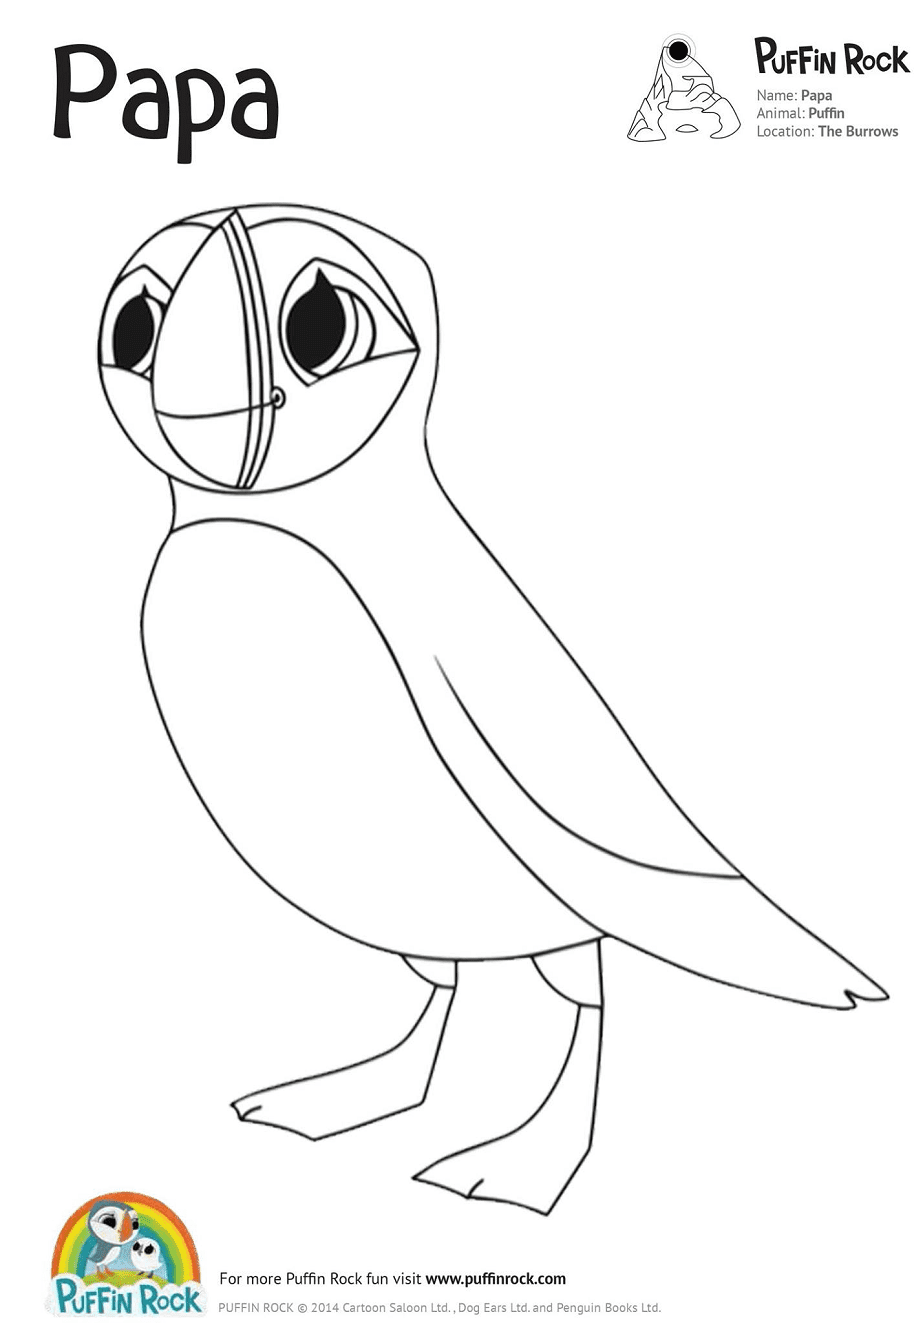 Papa from Puffin Rock Coloring Pages